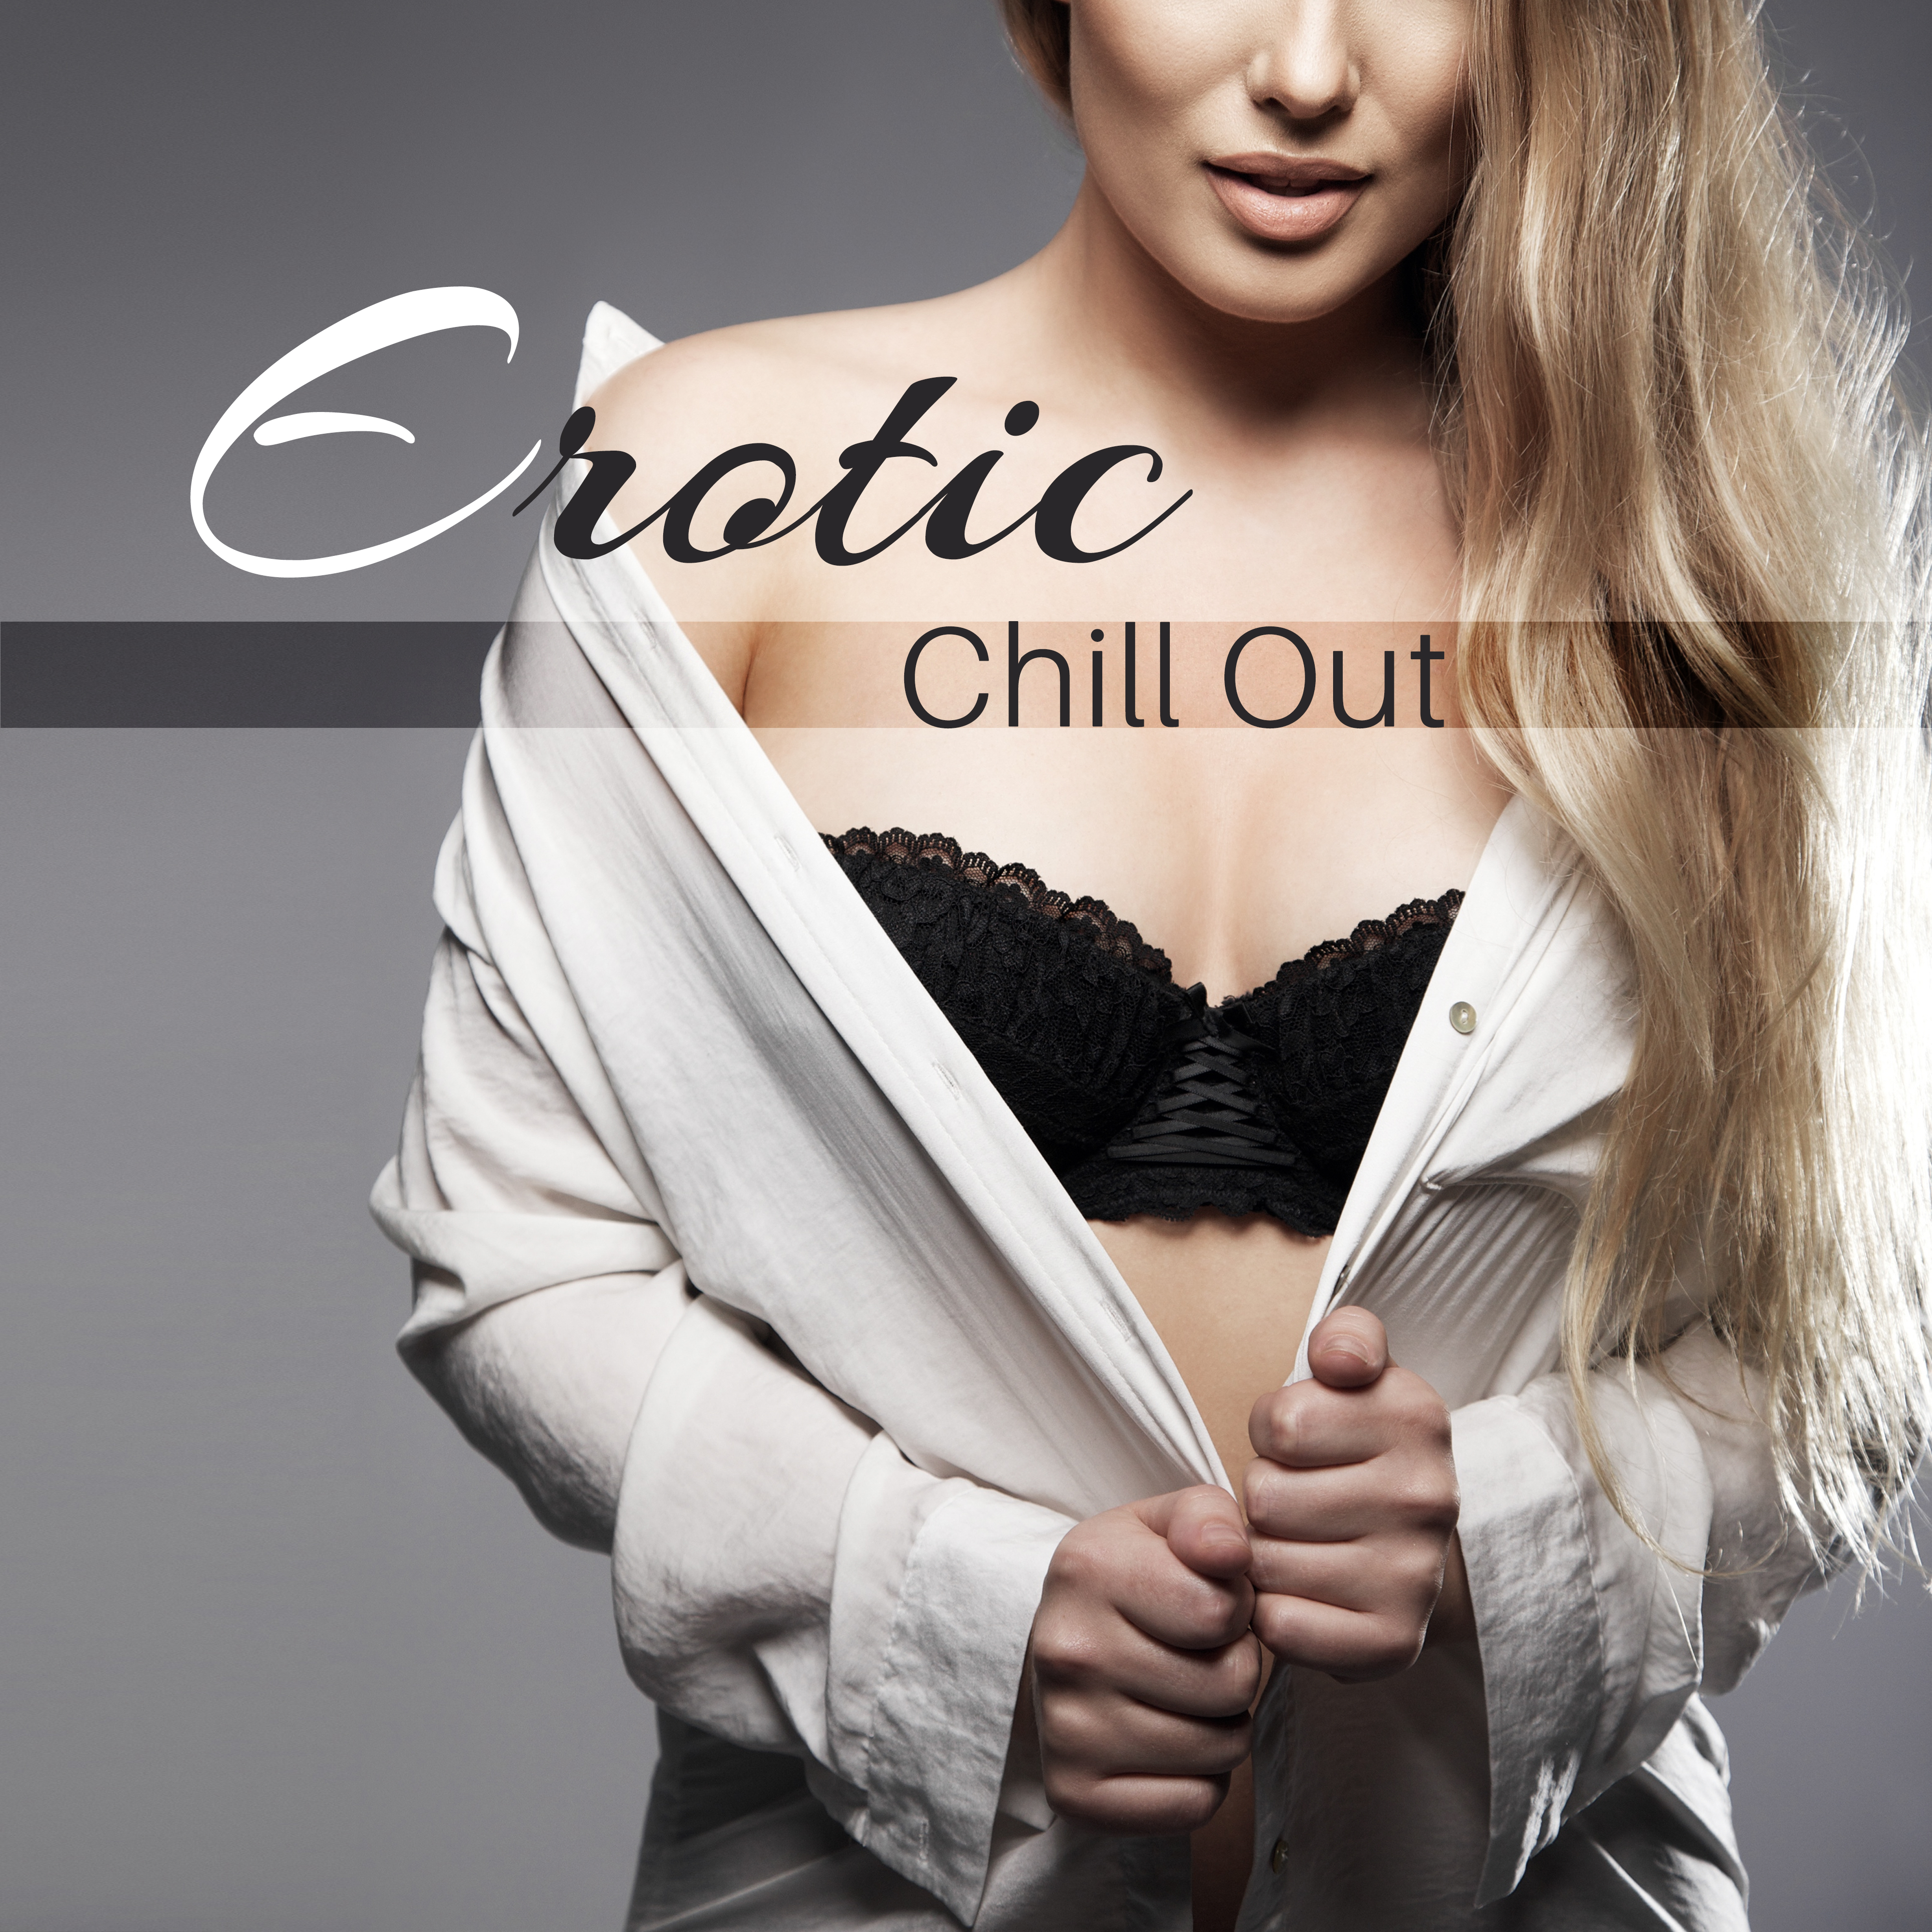 Erotic Chill Out – Sensual Massage, Chill Out Love, Summer Vibes, Calming Waves